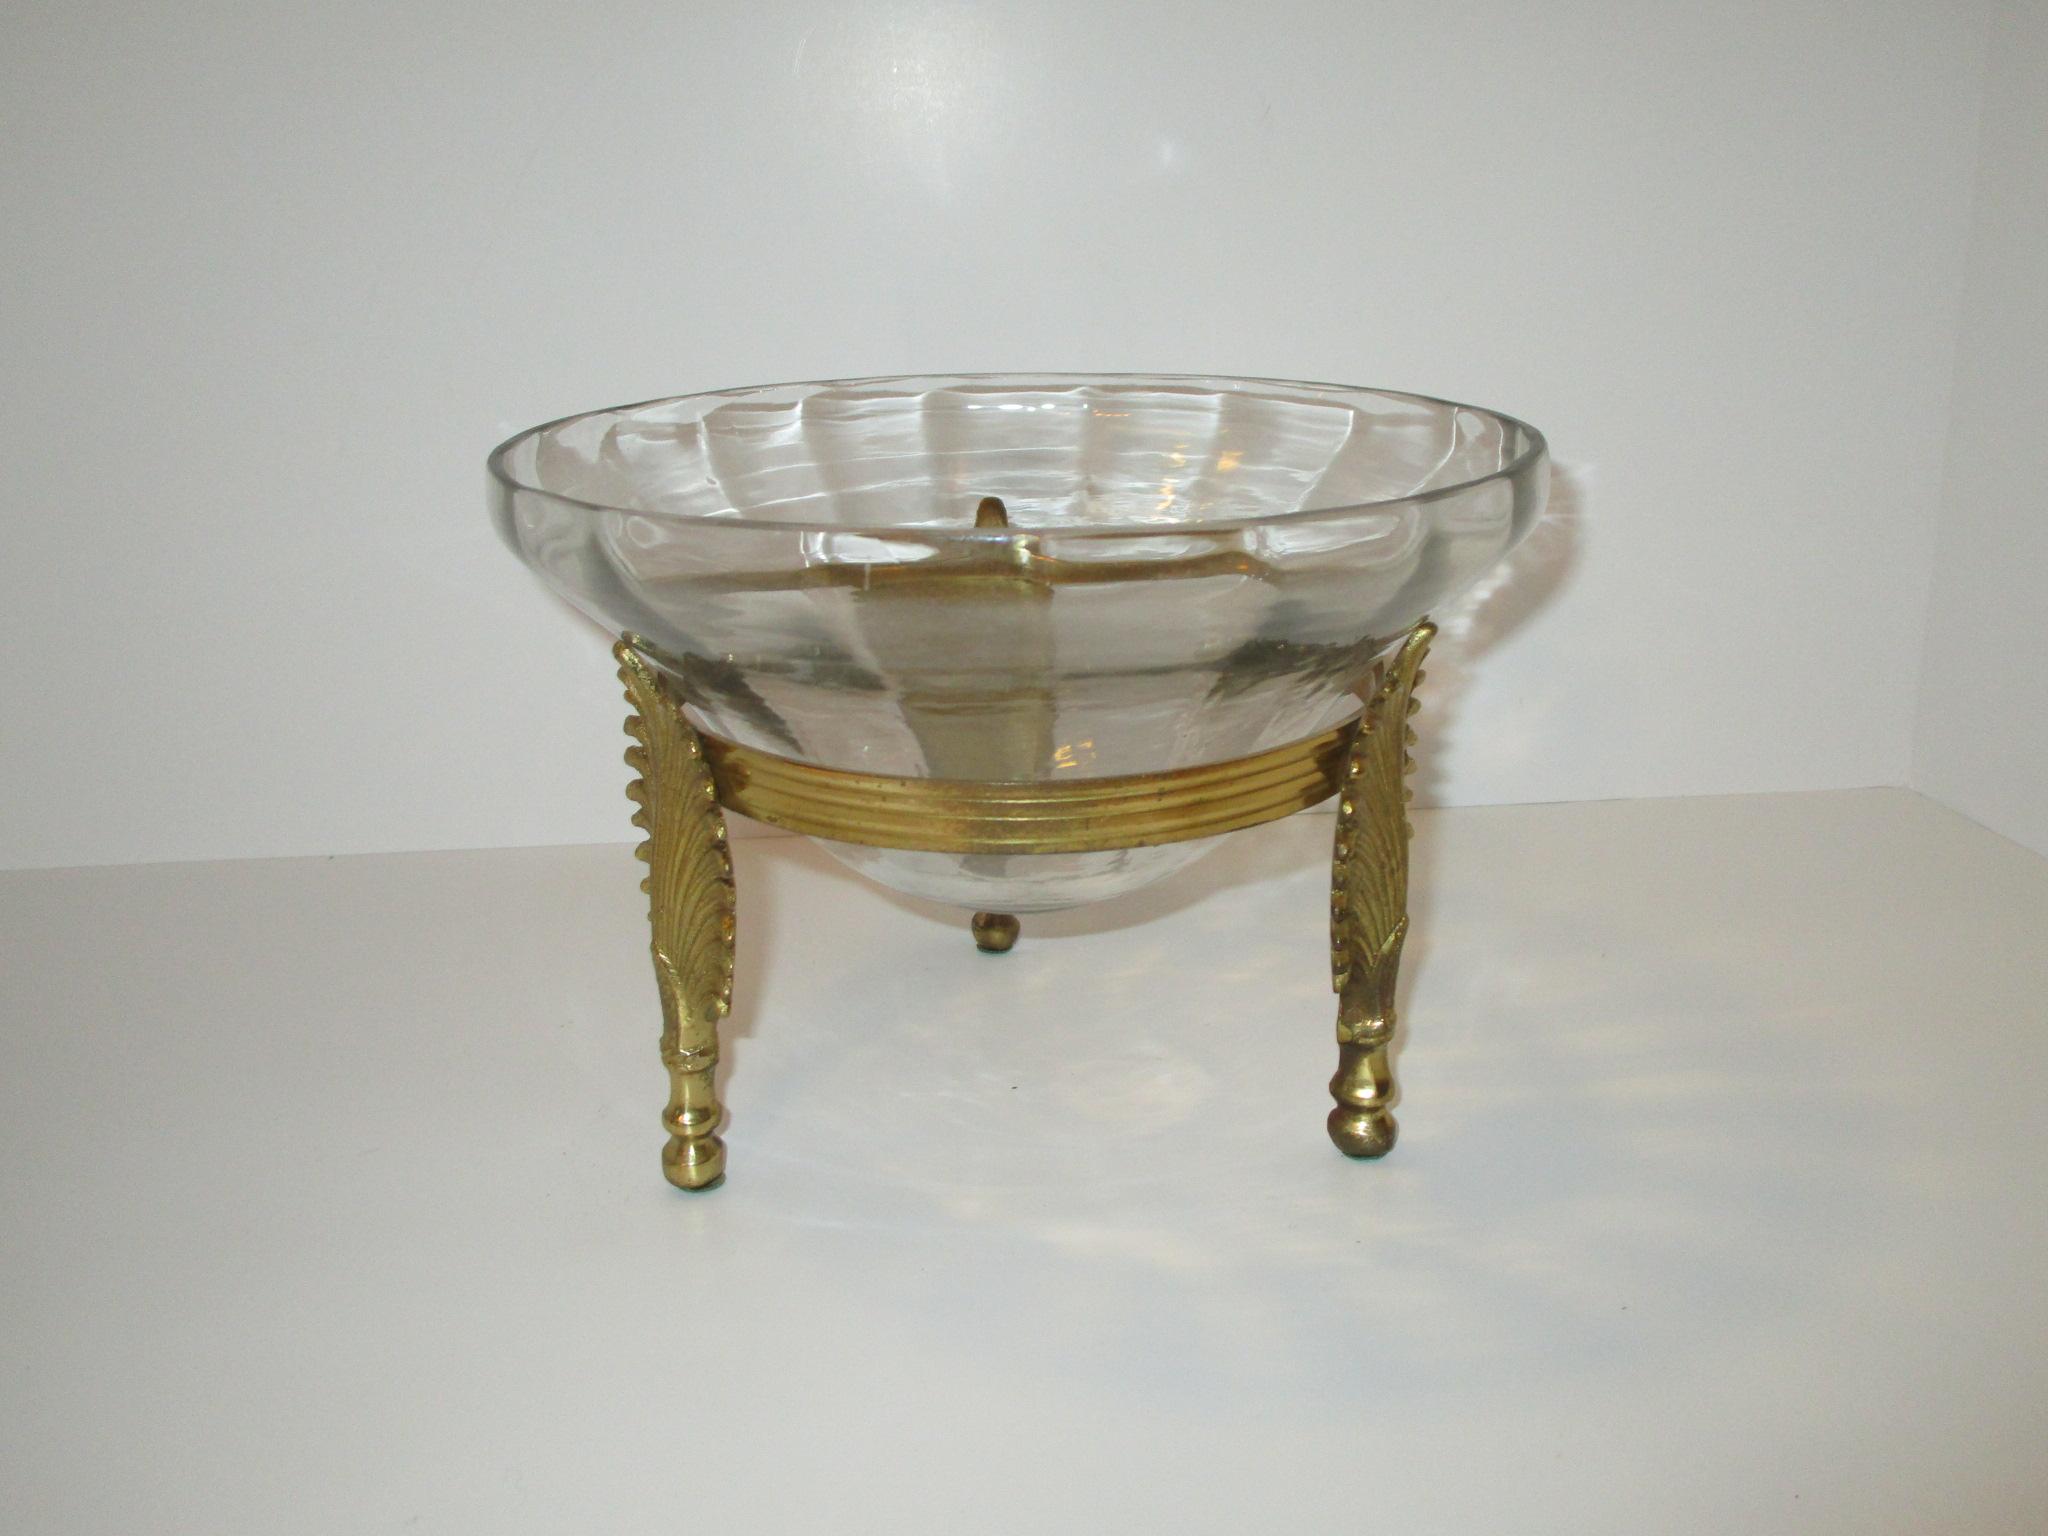 Glass Compote in Brass Fan Footed Holder    Approx. 8 1/2" Dia. x 6" Tall